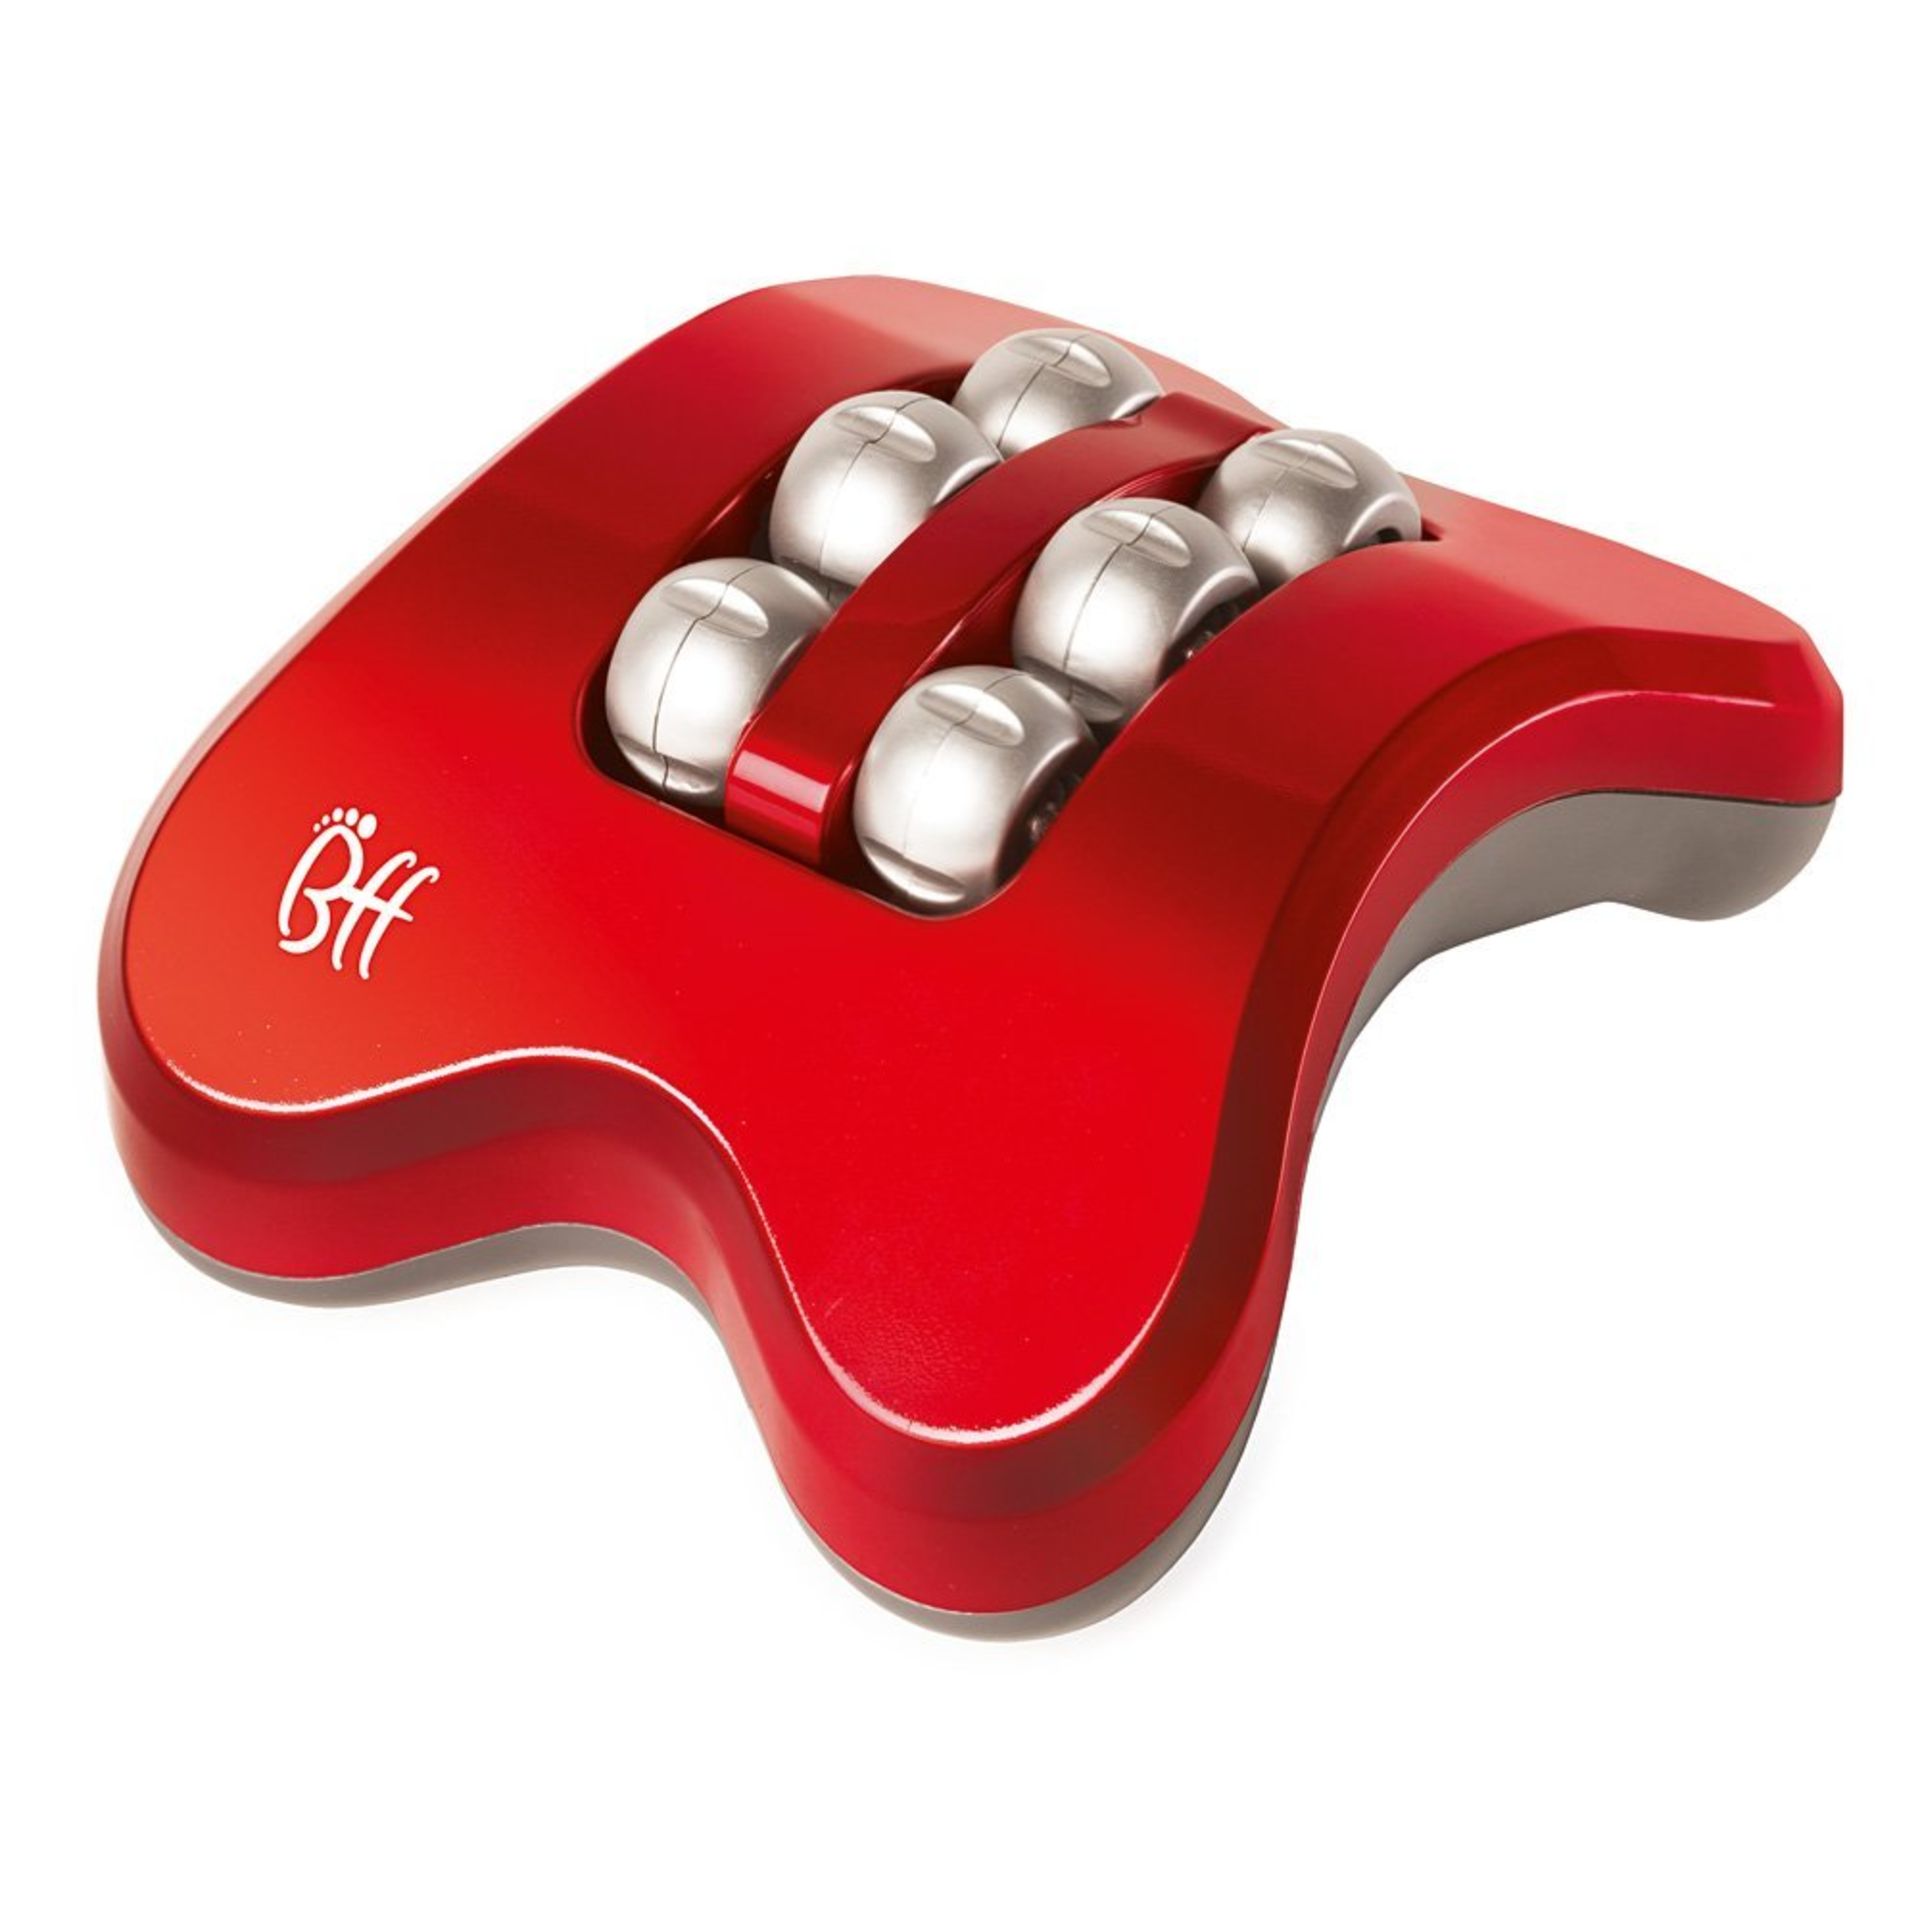 Foot Massager - Booster Relief -A relaxing massage, even when you're on the go! - Uses six